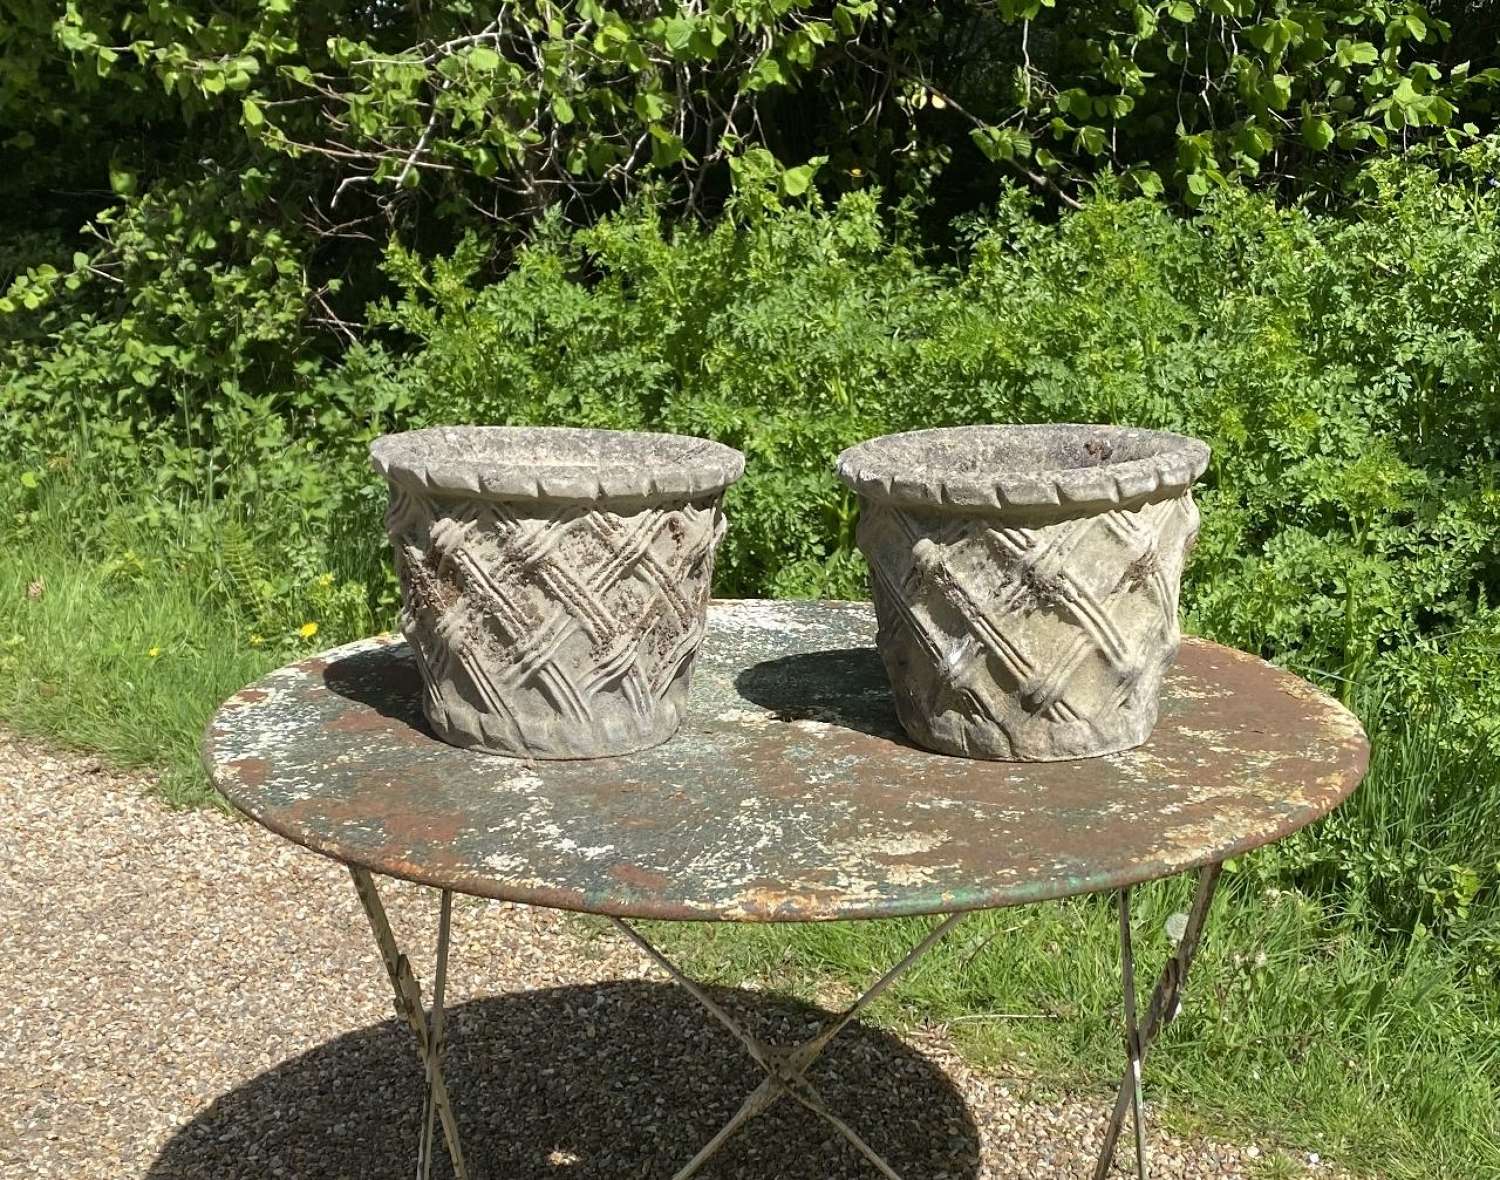 Pair of Small Basket Planters